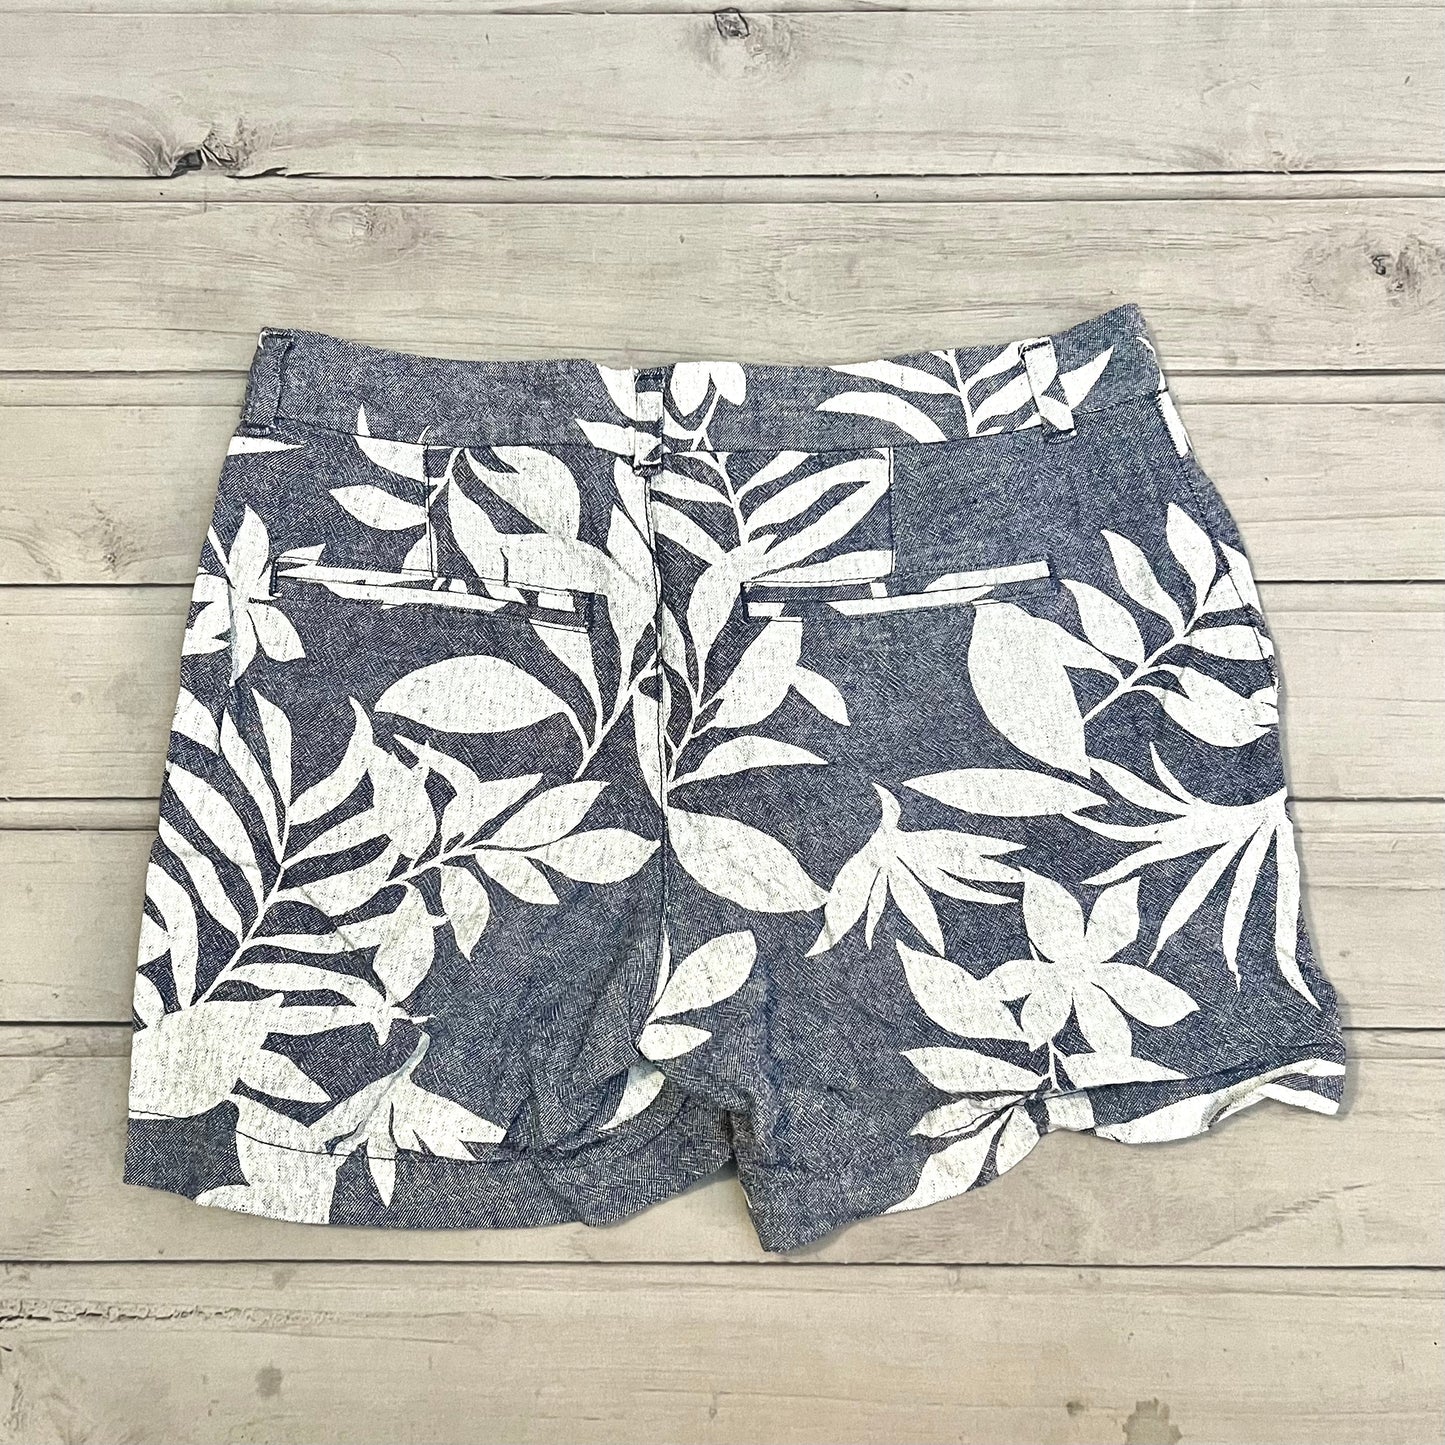 Shorts By Old Navy  Size: 6